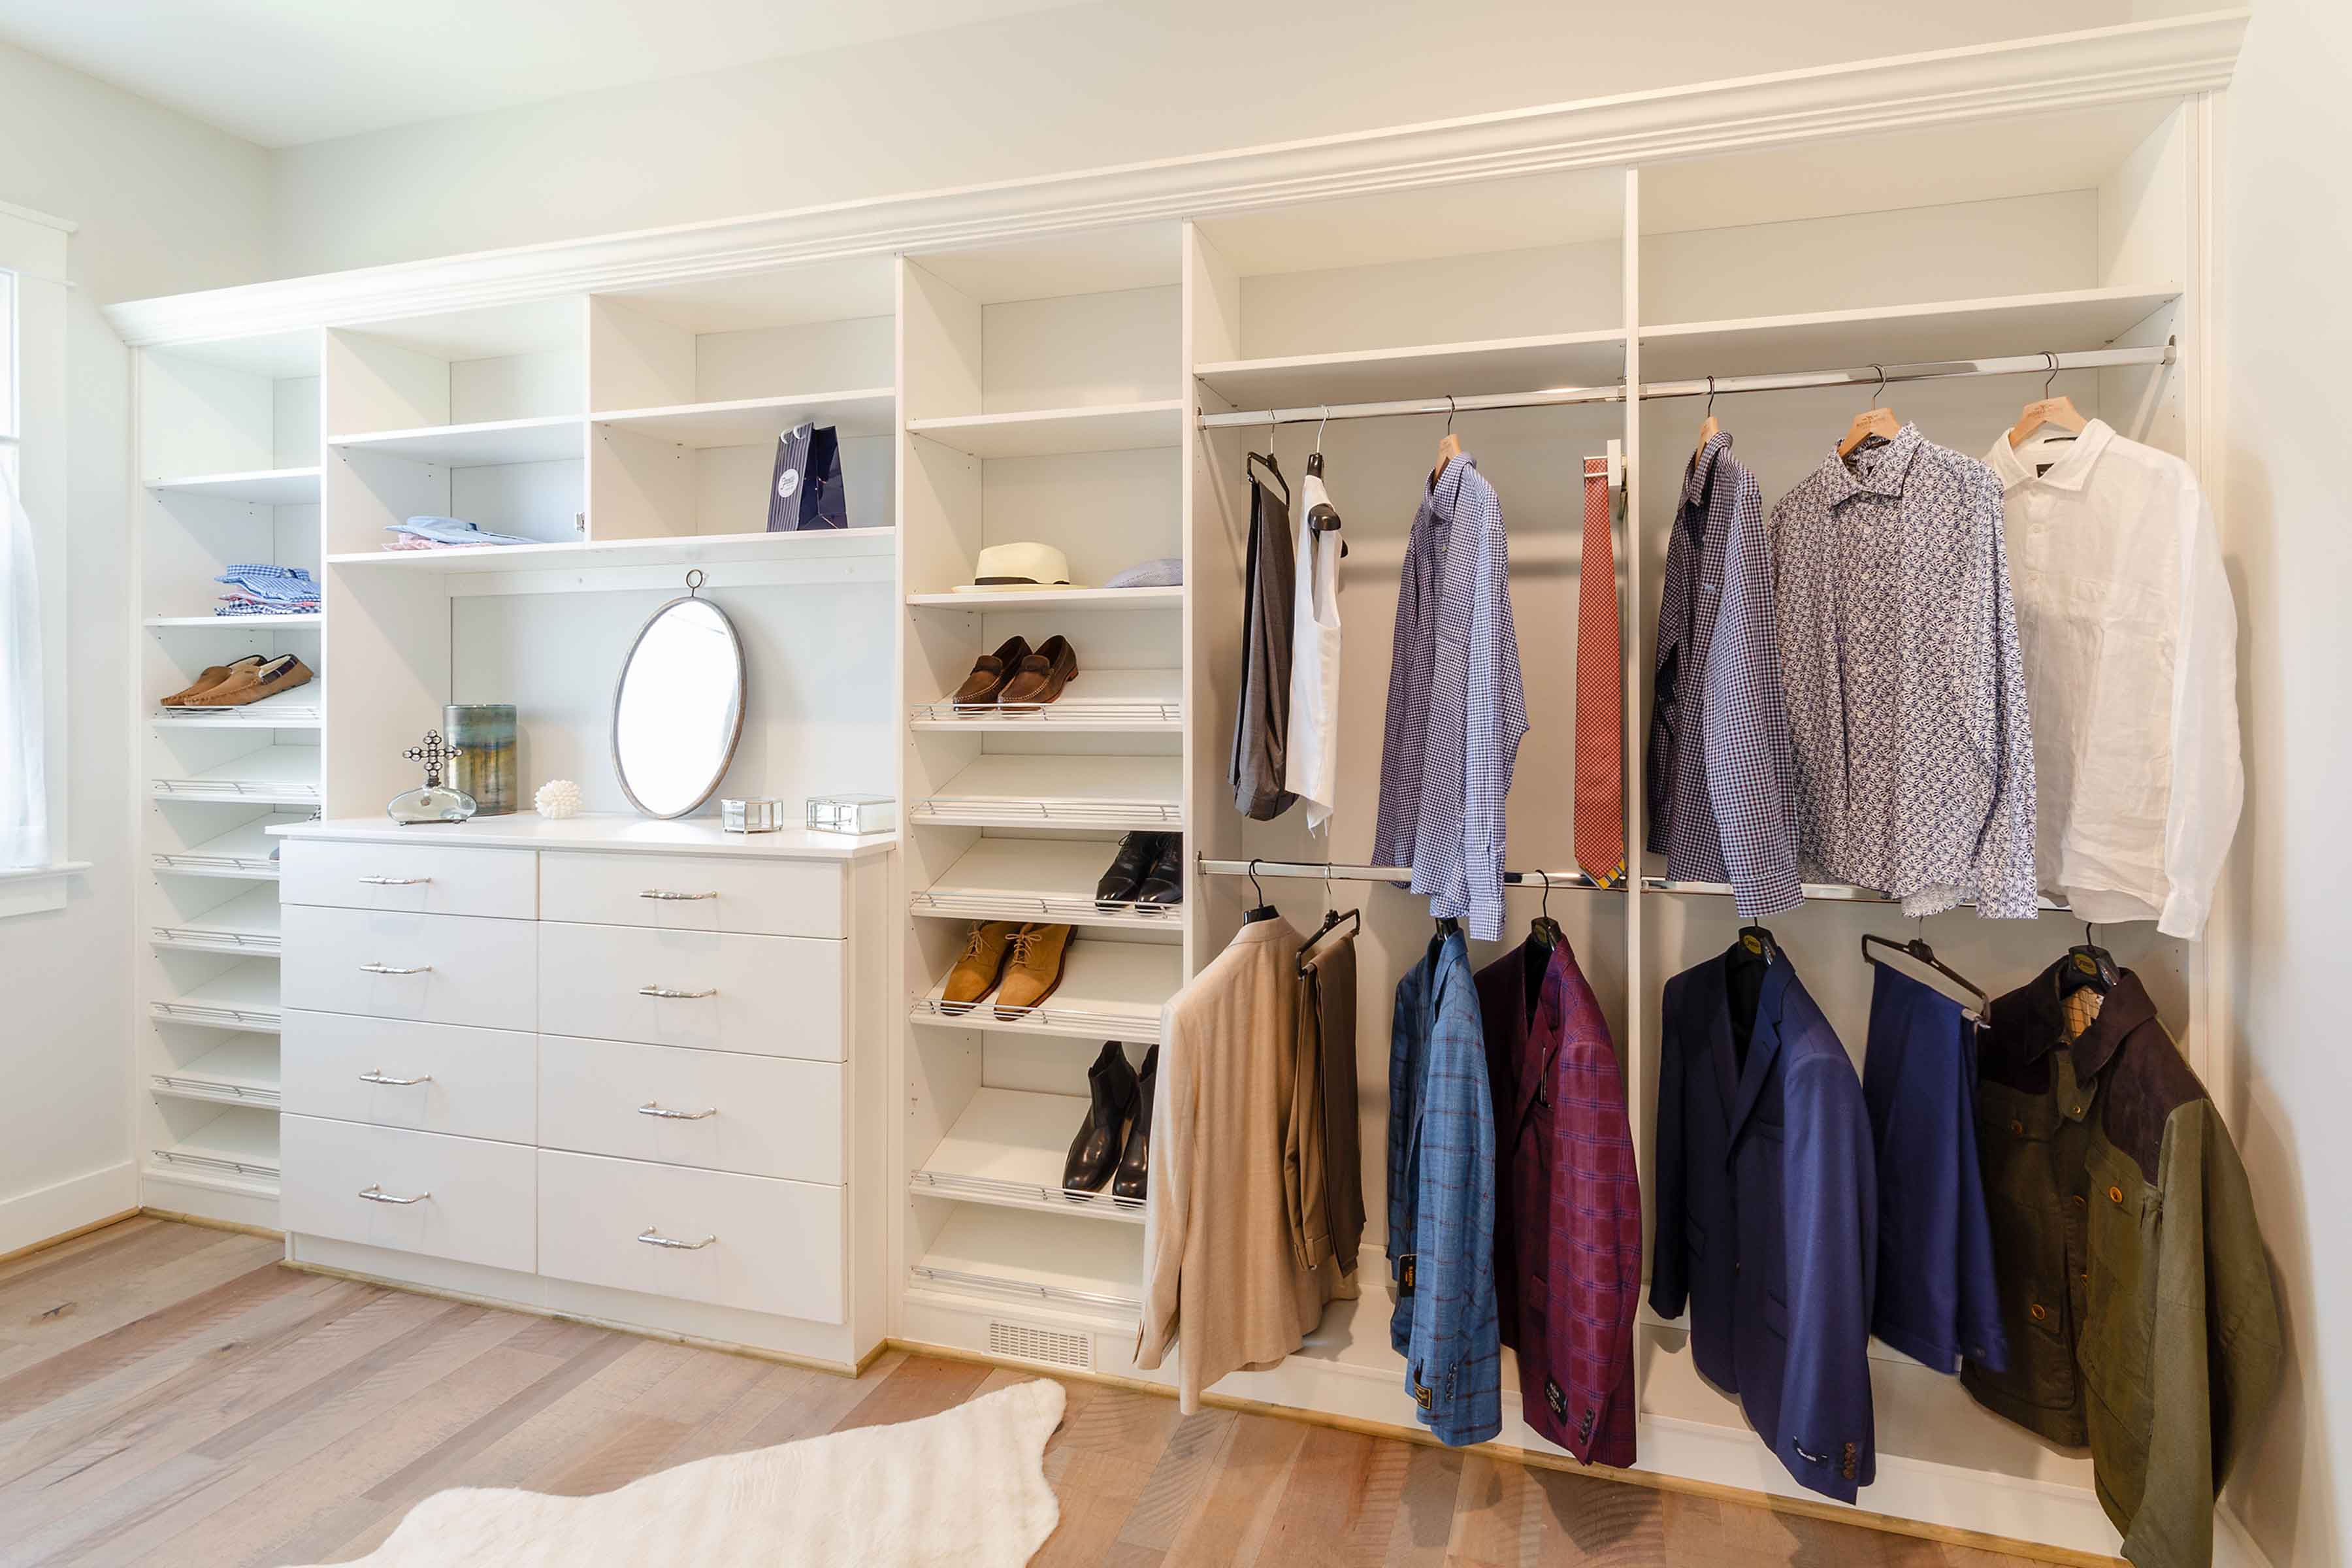 Closet Factory S Pantry And Closet Designs Featured In Three Showcase Homes Closet Factory